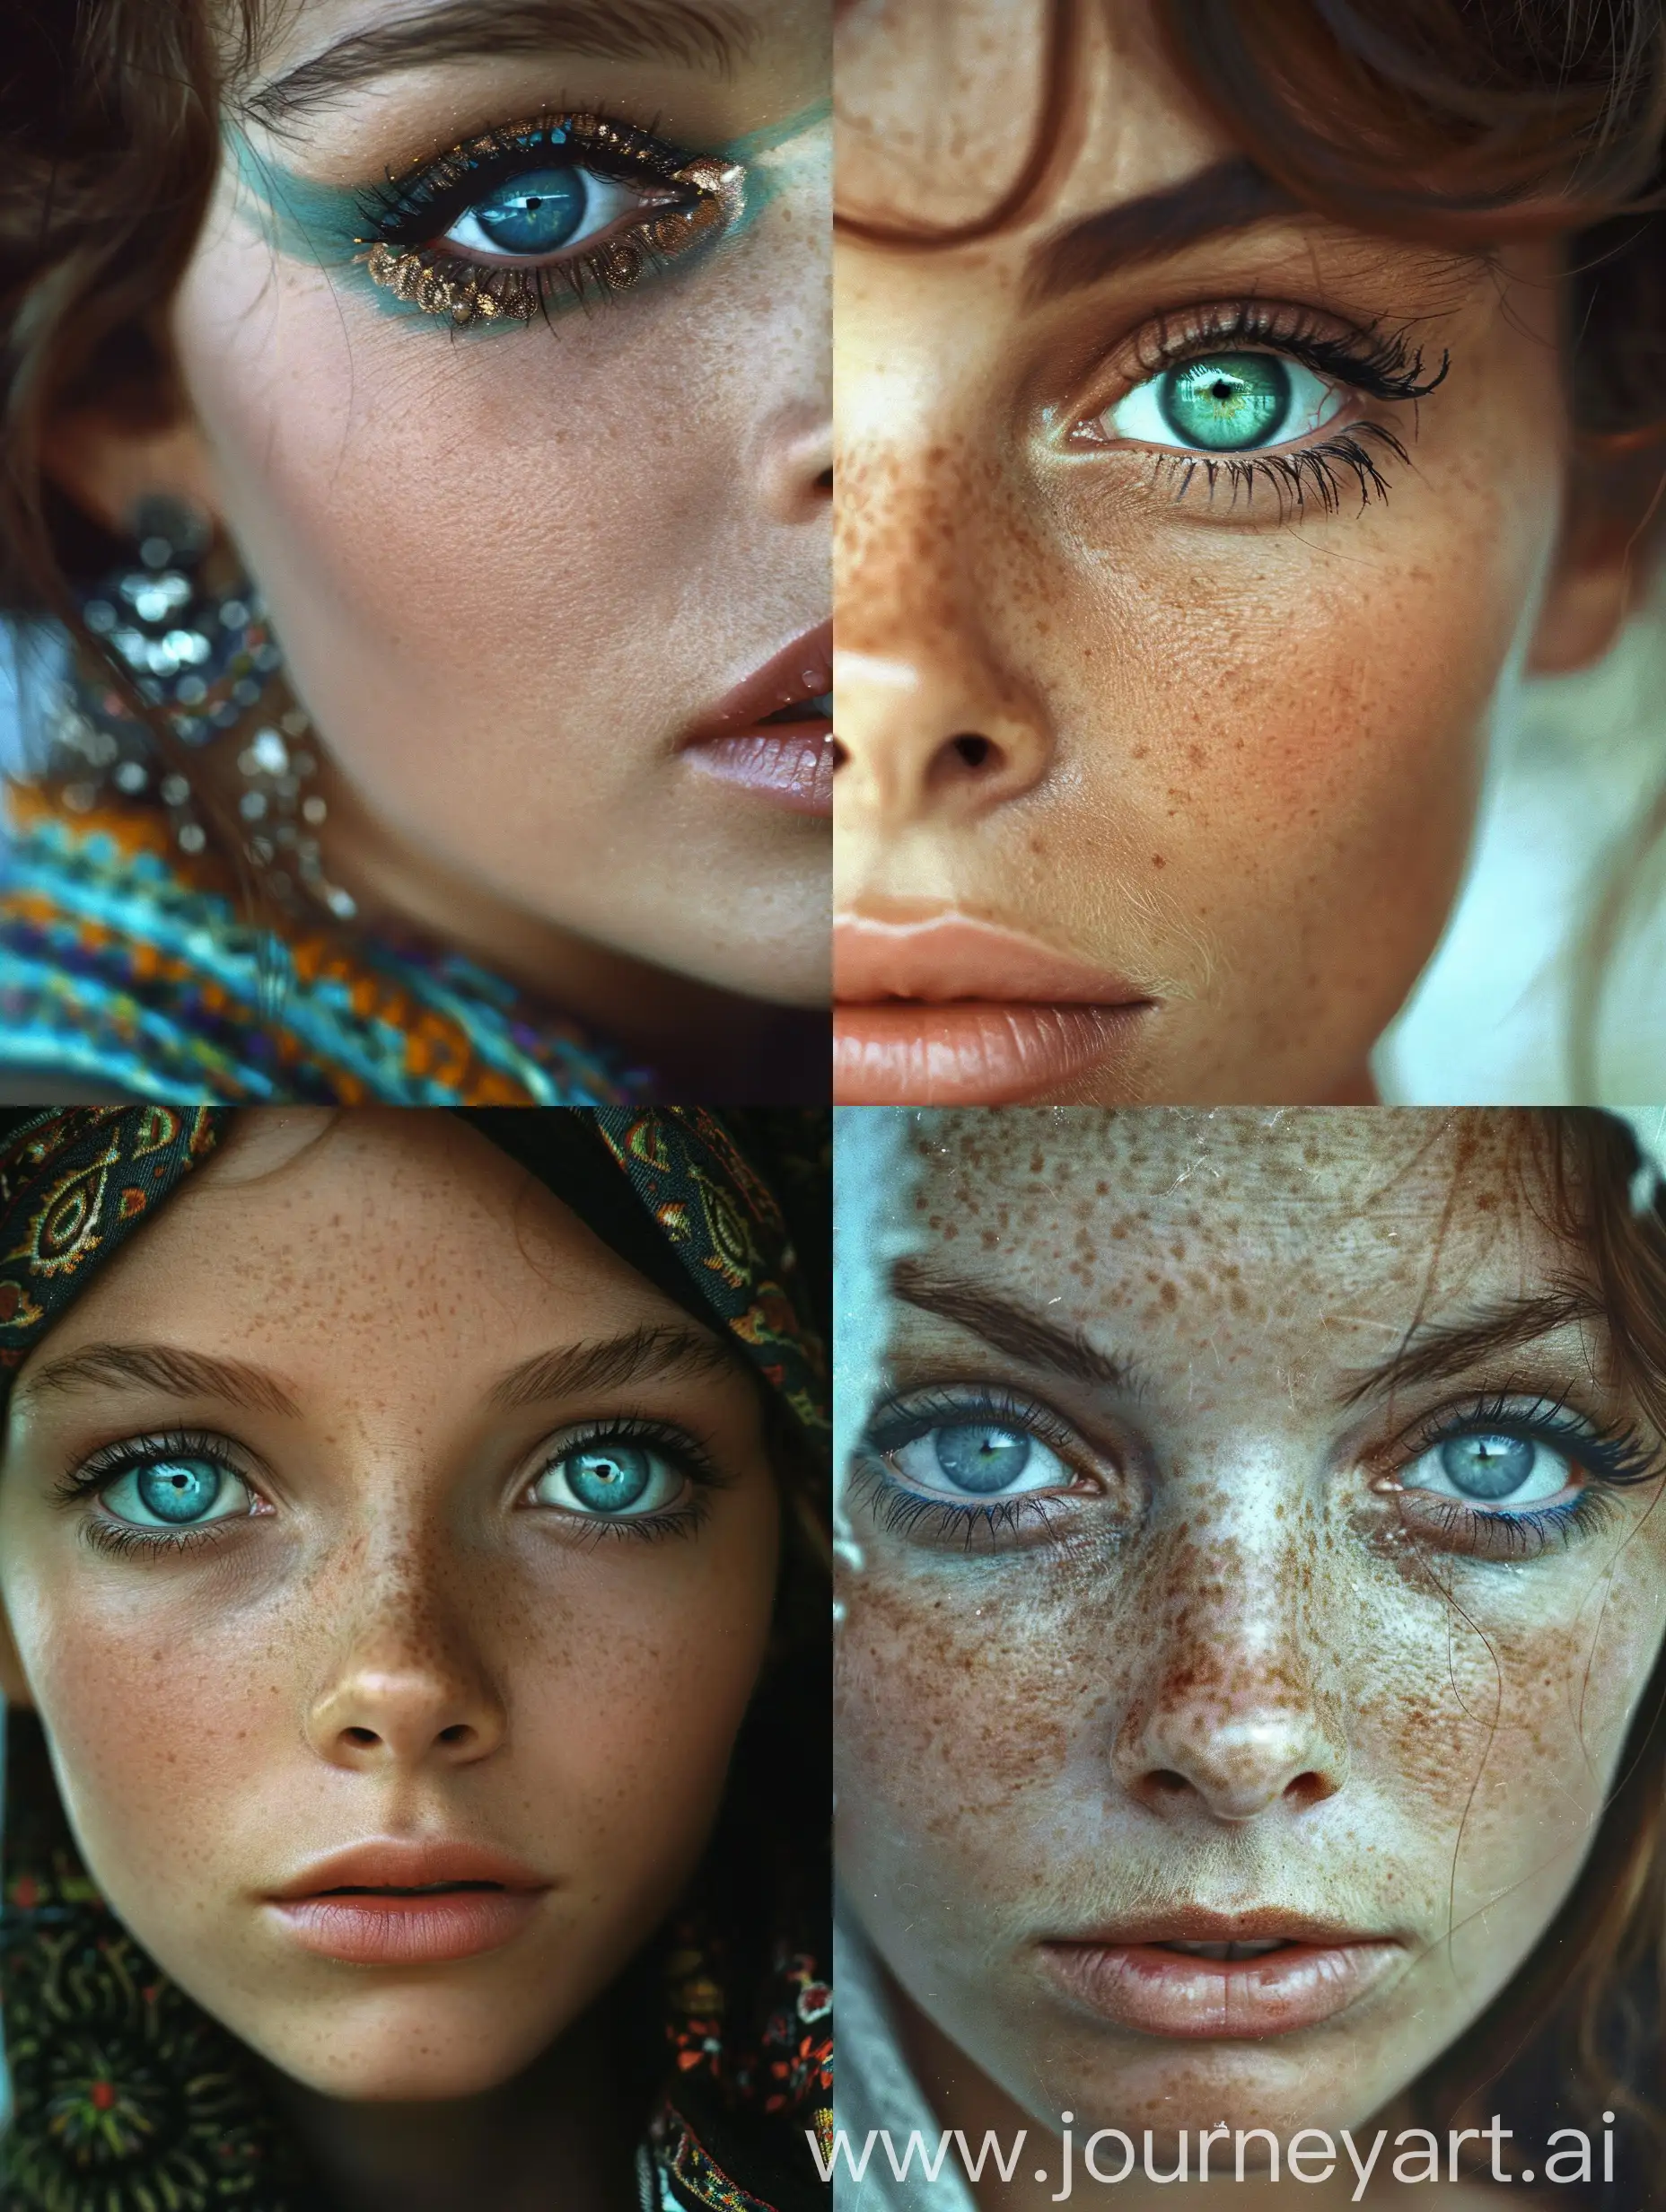 Stunning-Woman-with-Turquoise-Eyes-in-Vintage-Color-Photography